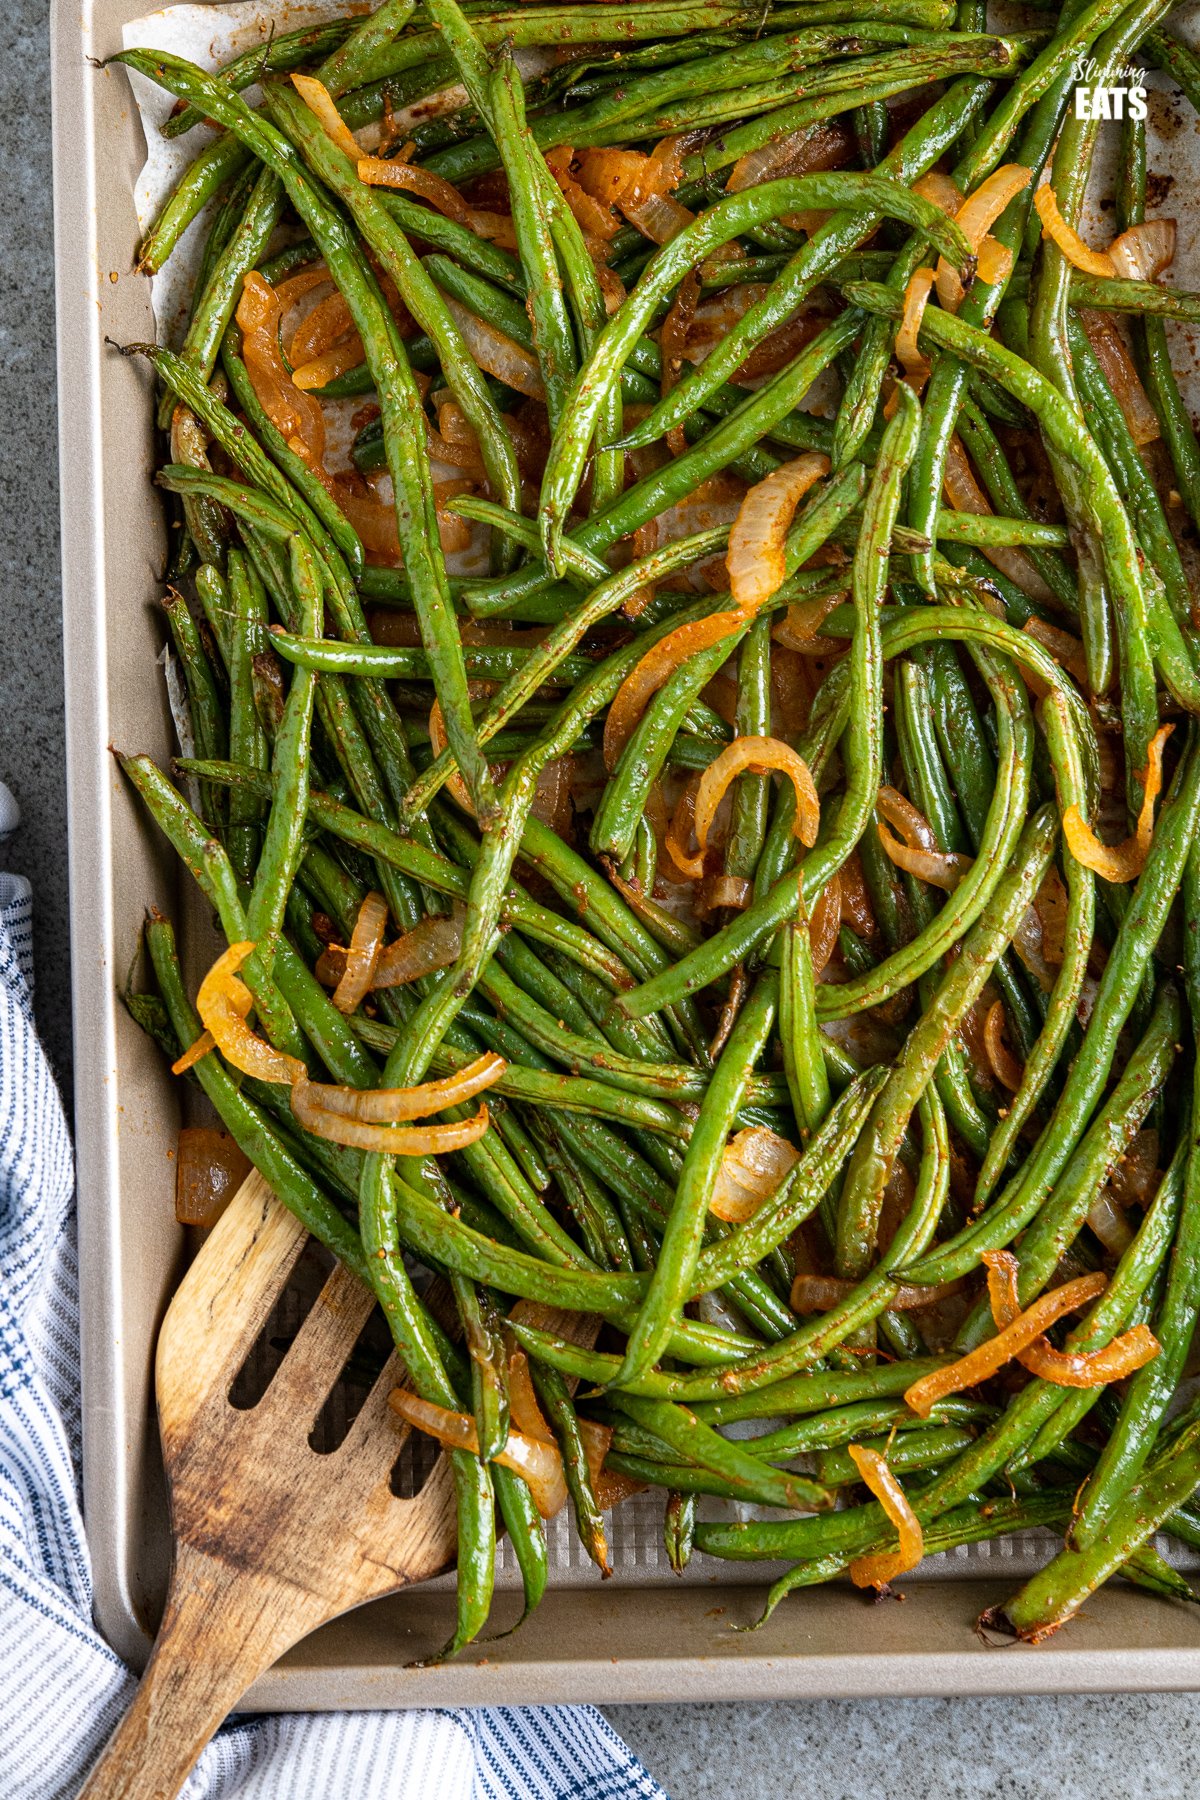 Roasted Green Beans on a baking tray with wooden spatula